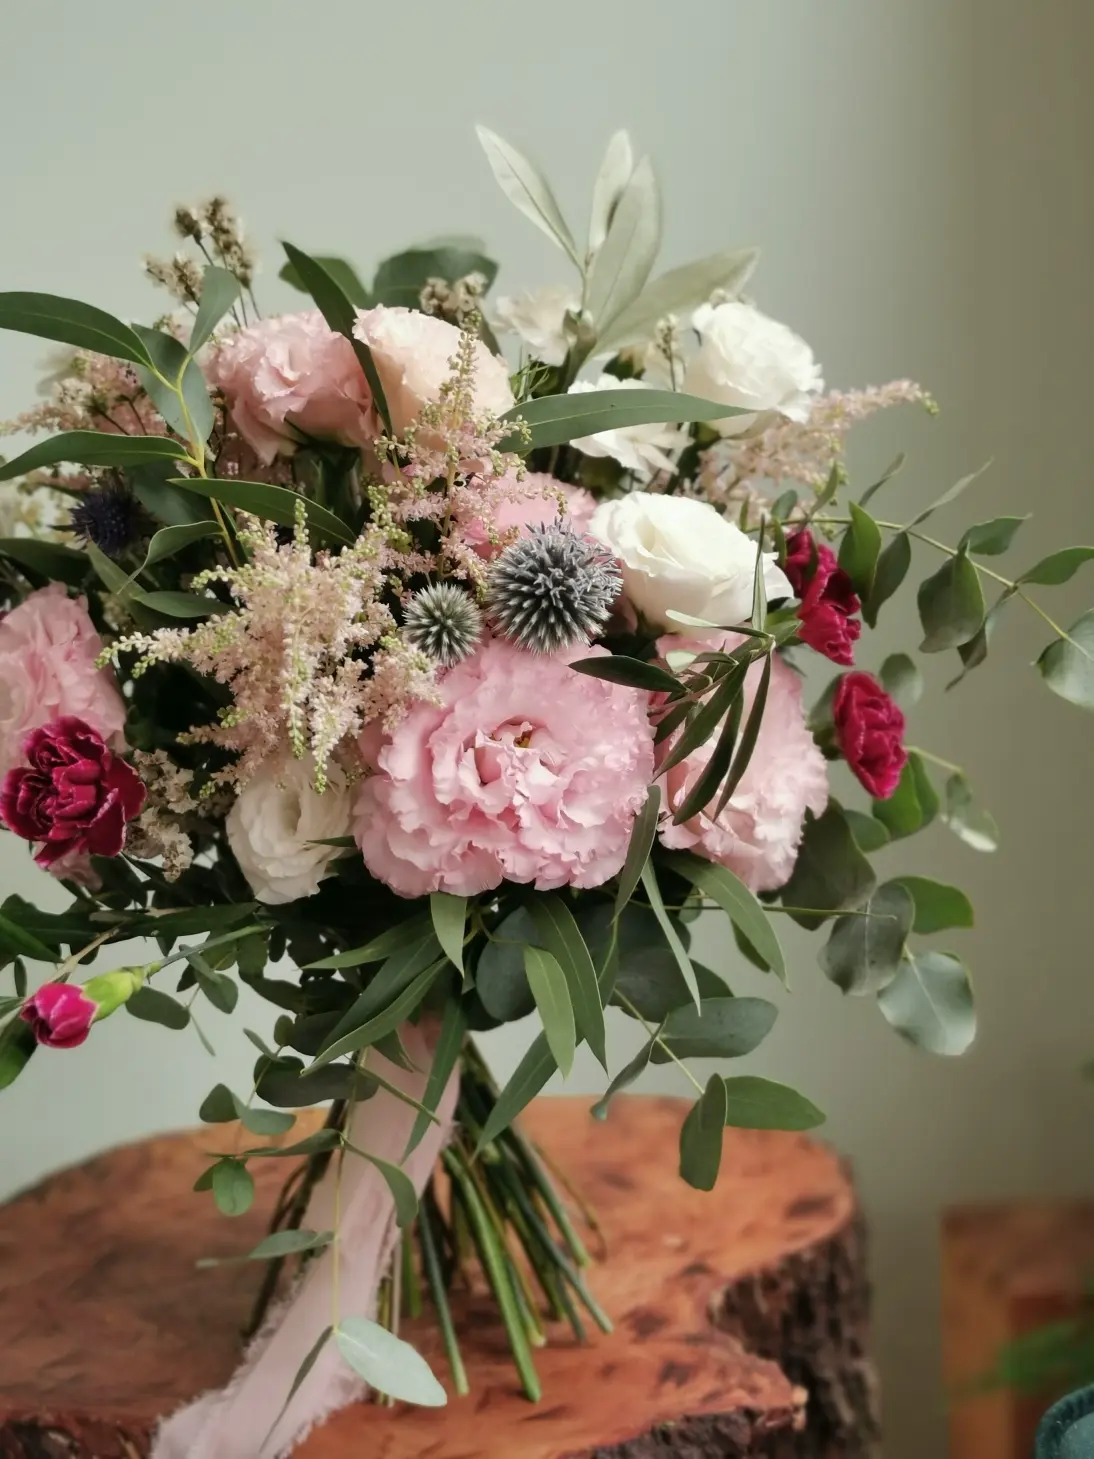 Romantic eustoms in shades of pink and white, complemented by a soaring filigree trailing sedum , navy blue scallops and a stronger carnation accent.